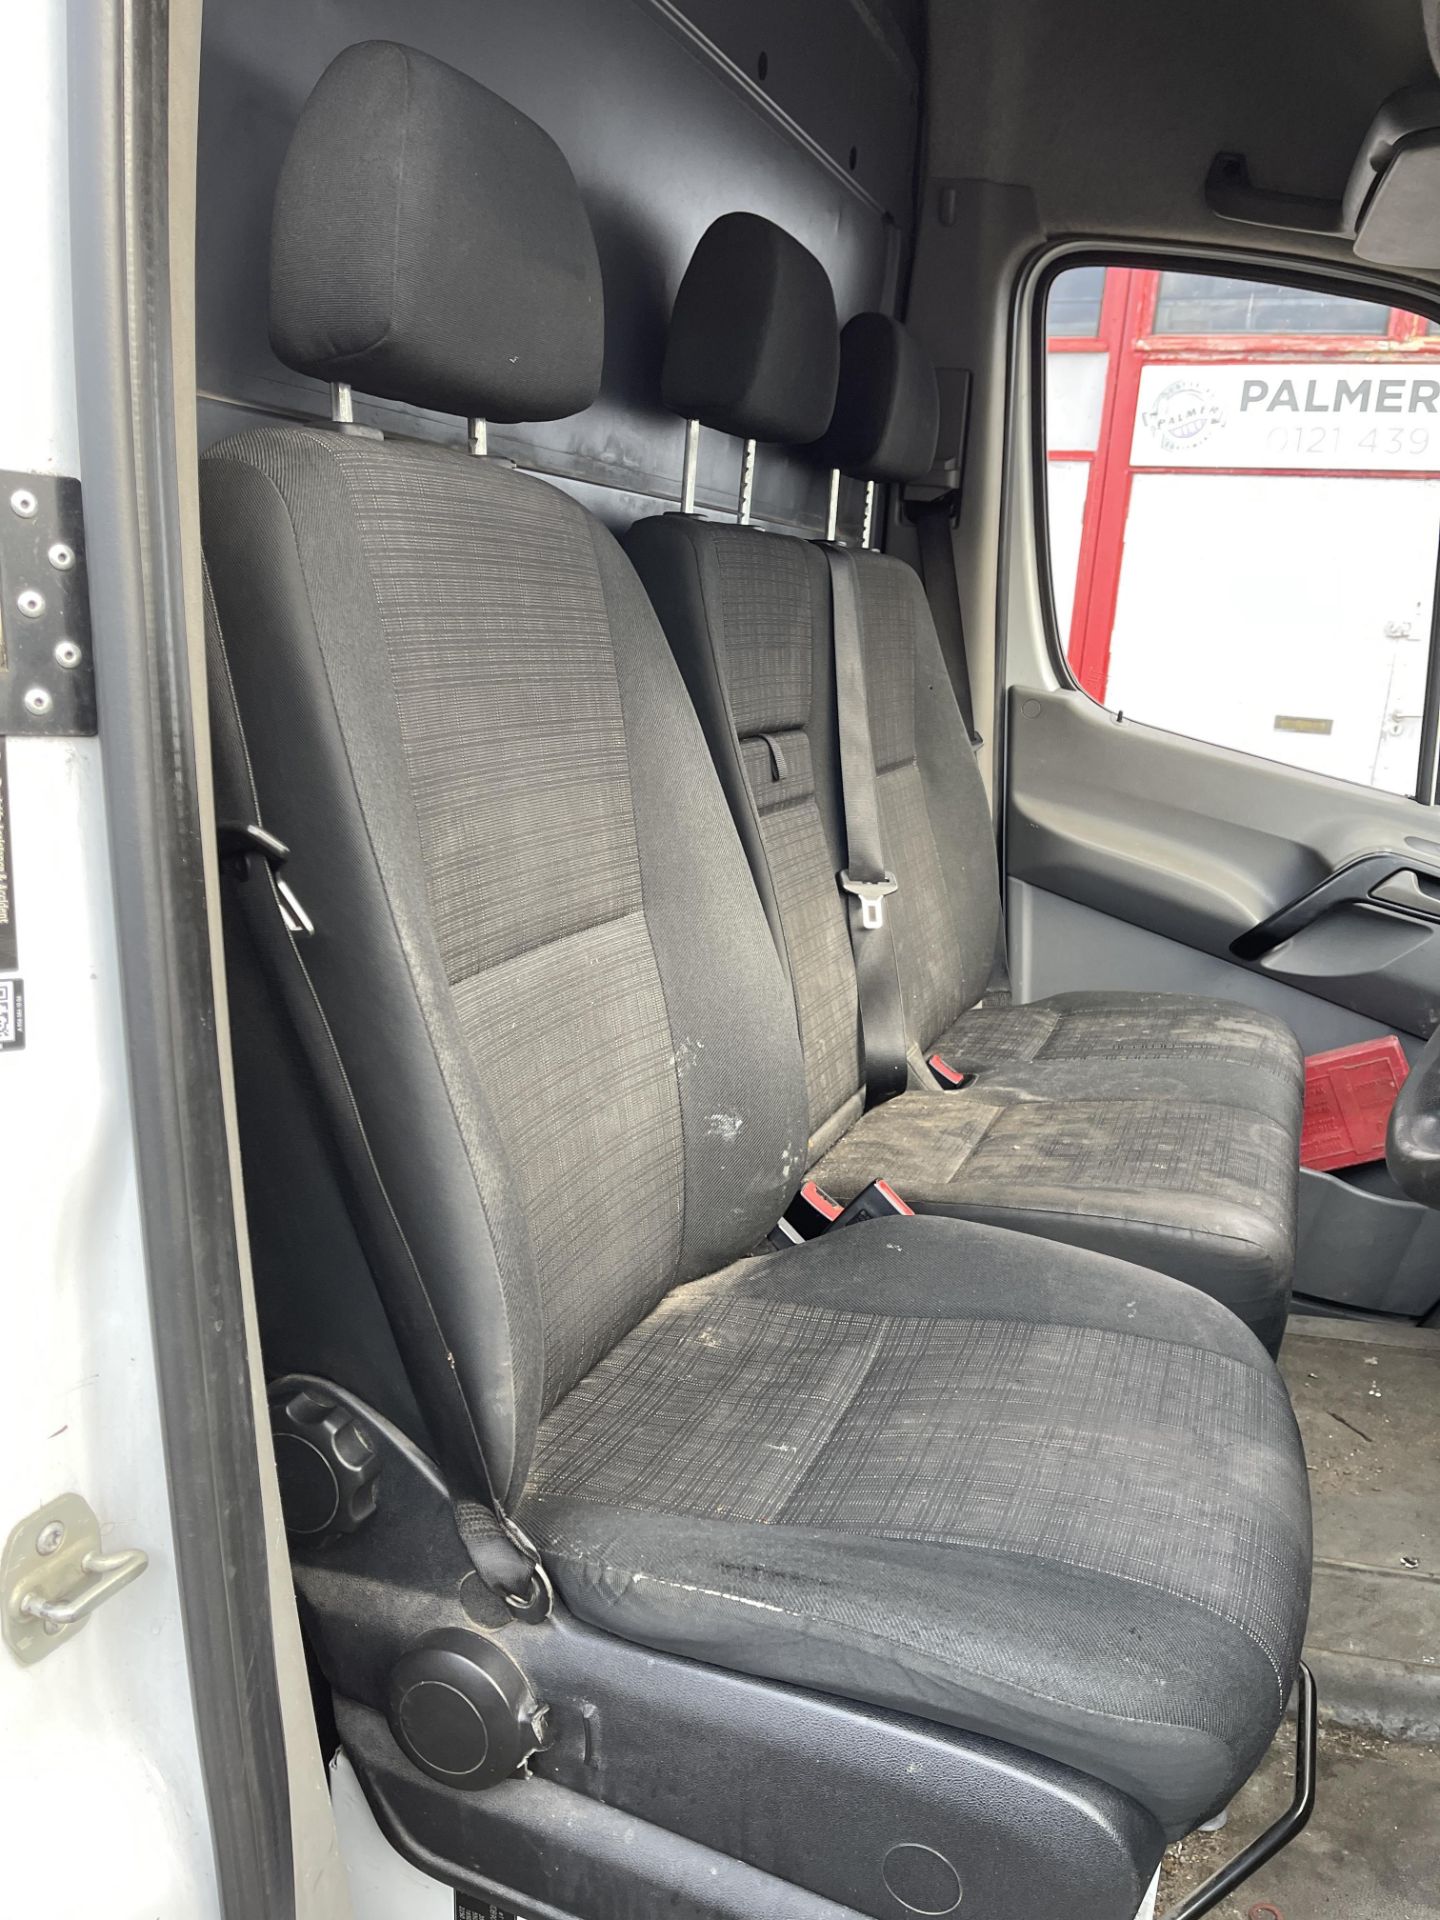 2014 - Mercedes Sprinter MWB - Facelift Model - Low Miles for Age - Image 36 of 39